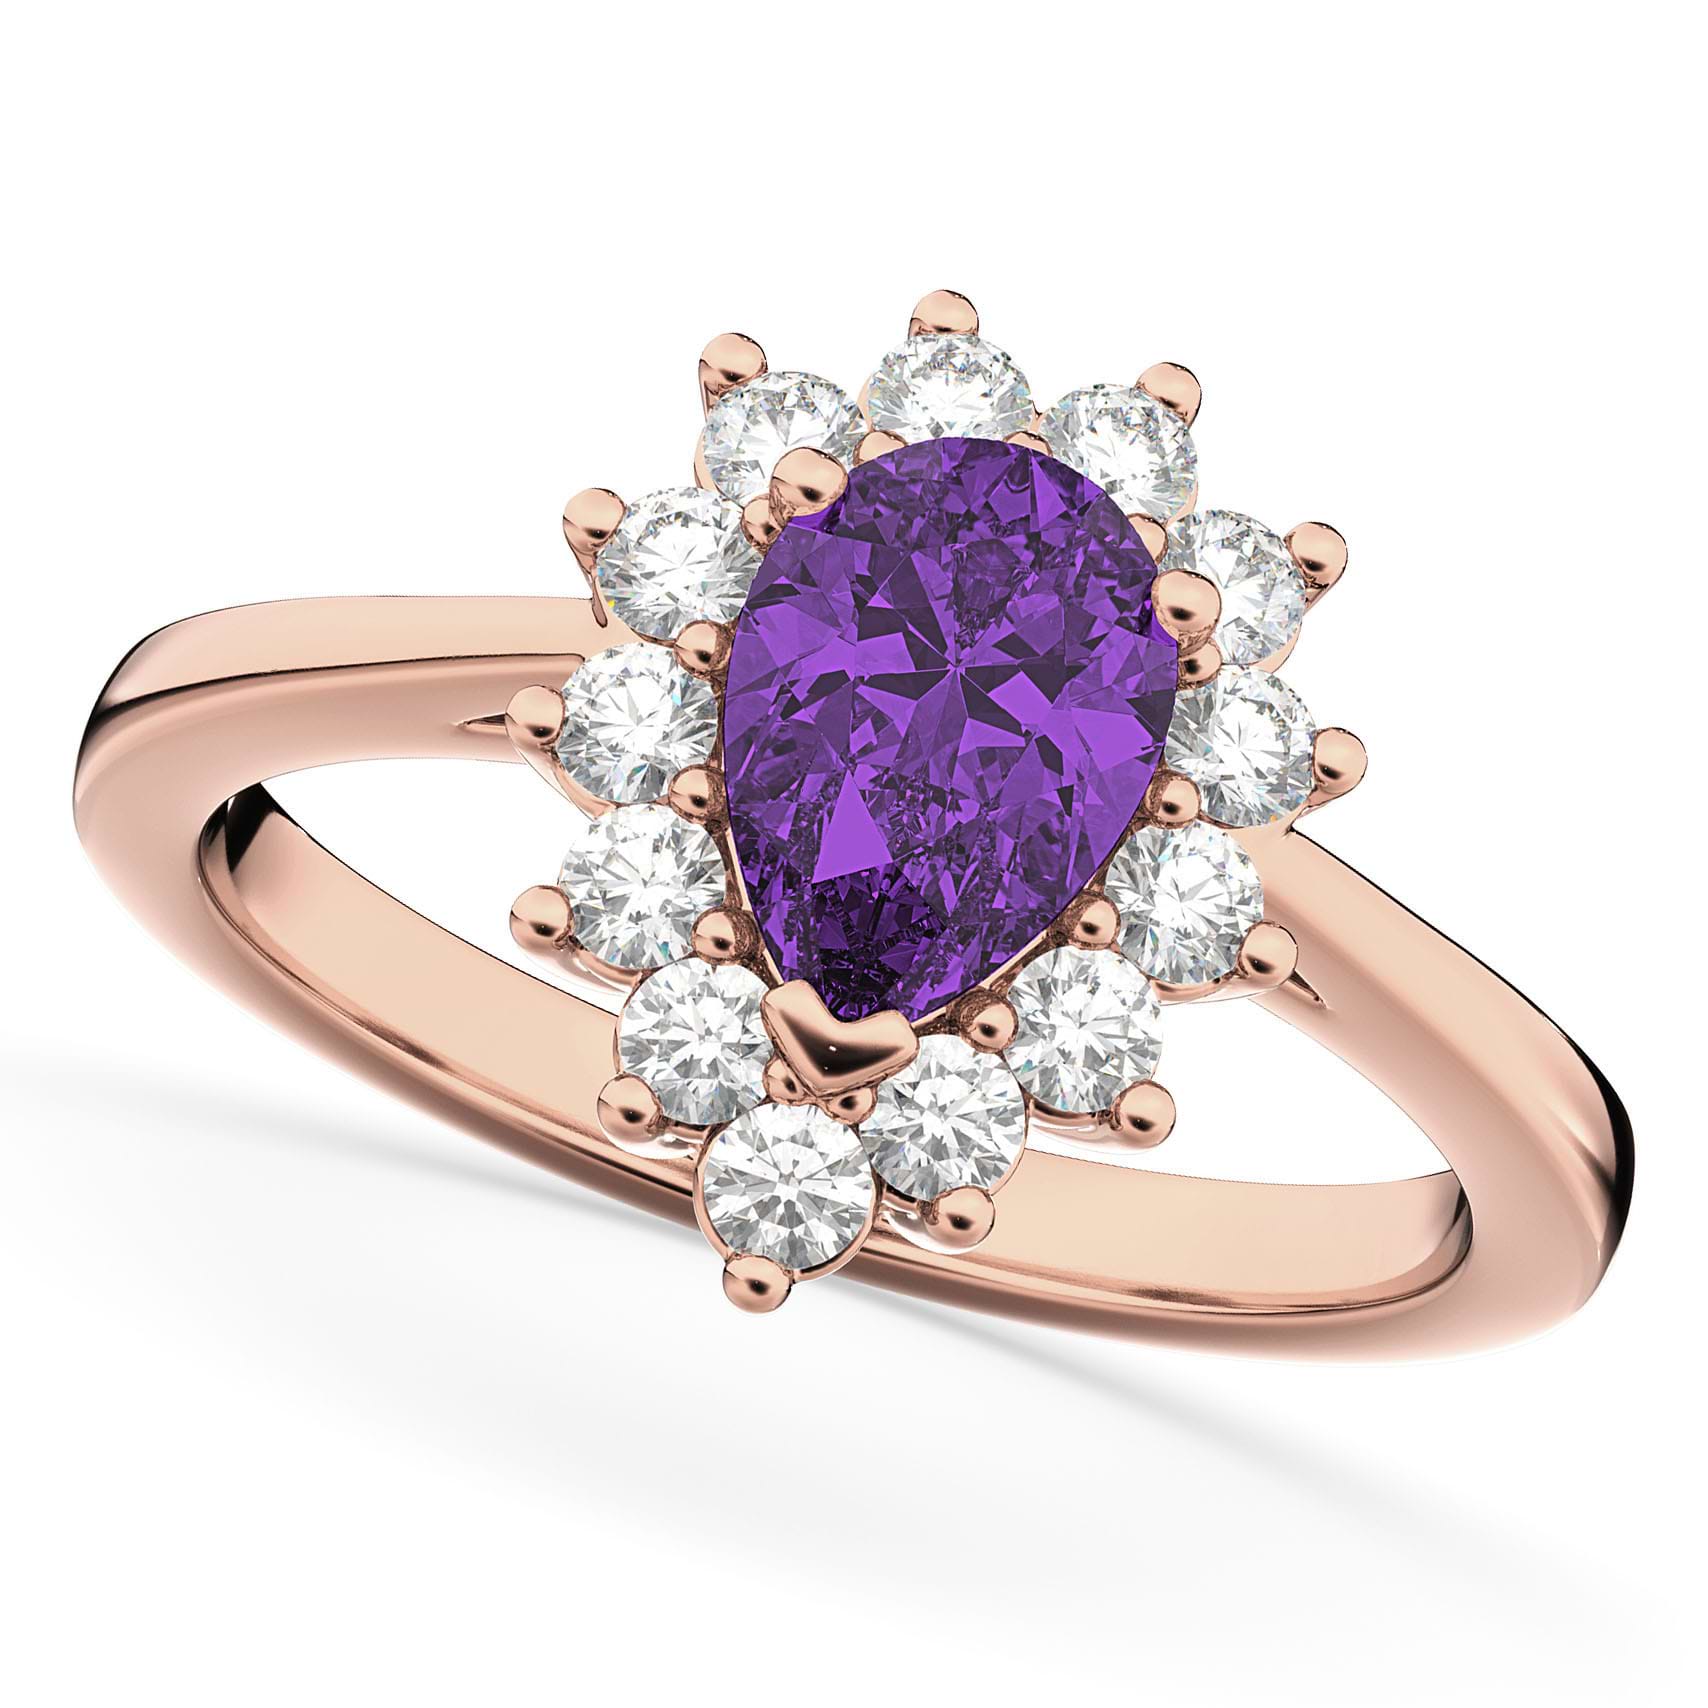 Halo Amethyst & Diamond Floral Pear Shaped Fashion Ring 14k Rose Gold (1.07ct)